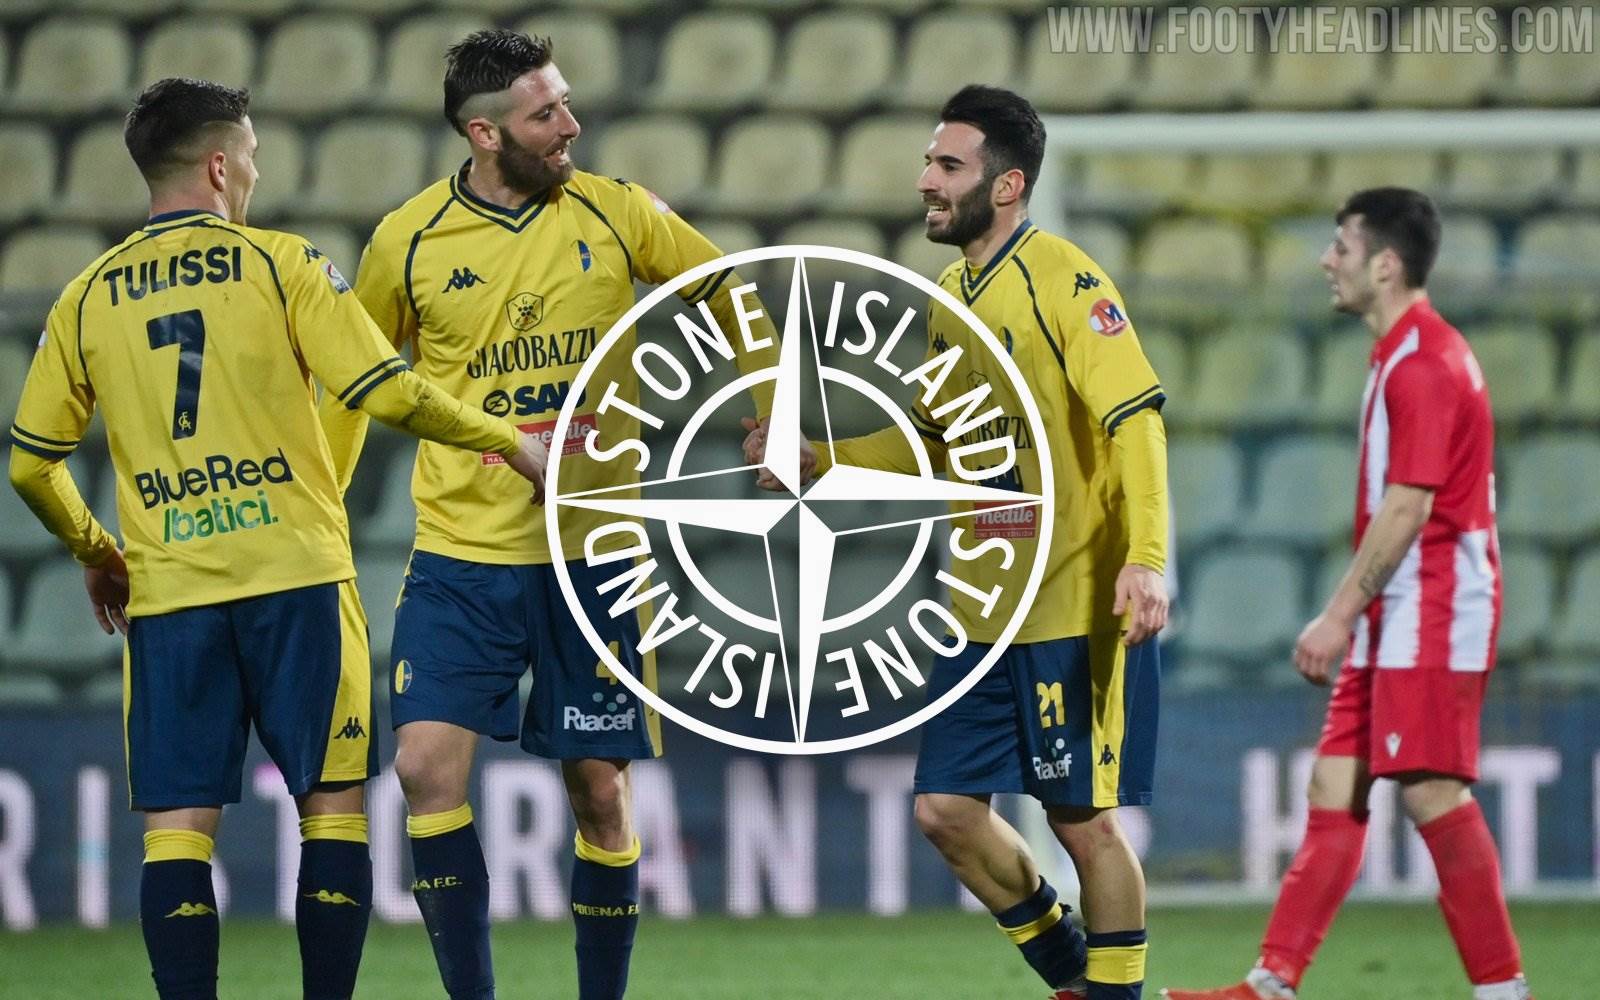 FC Modena, Brands of the World™